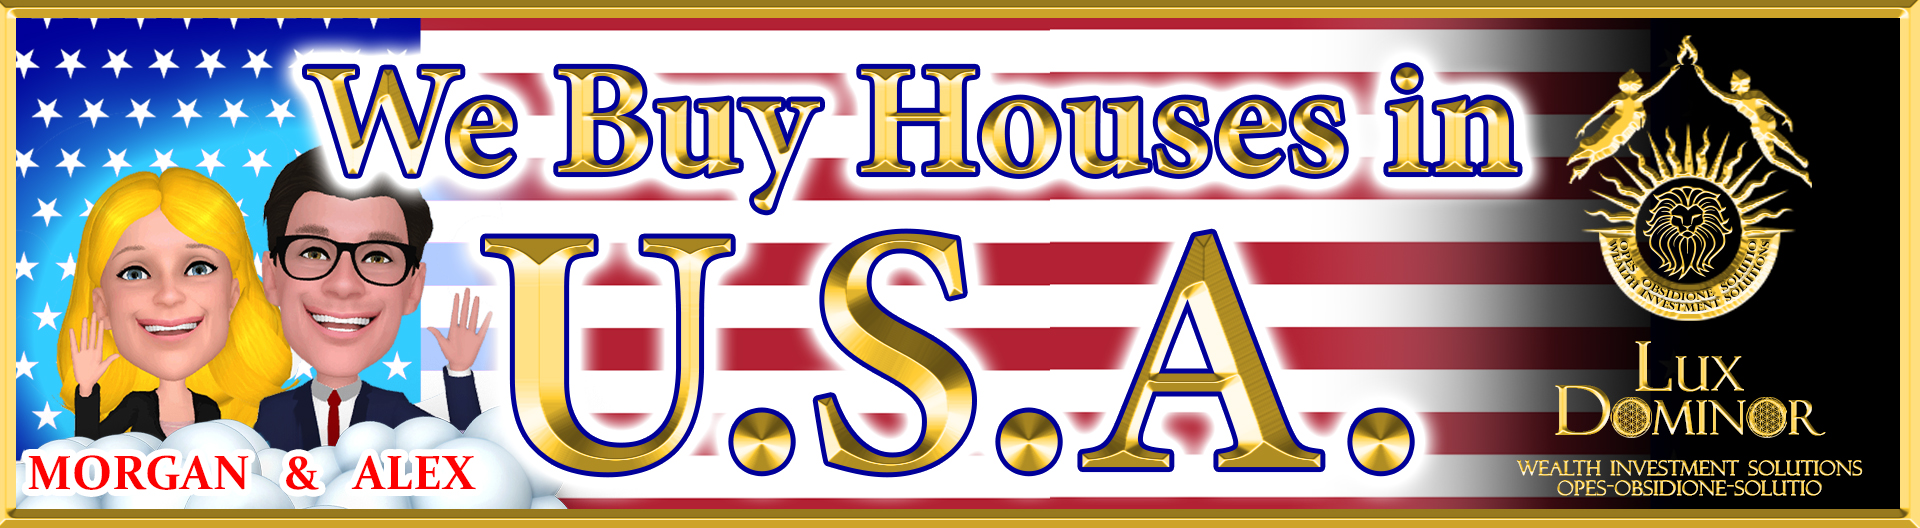 Luxdominor.com - Real Estate Investments - American Pride Usa Land Of The Free, Home Of The Brave! Advertisement Banner 2